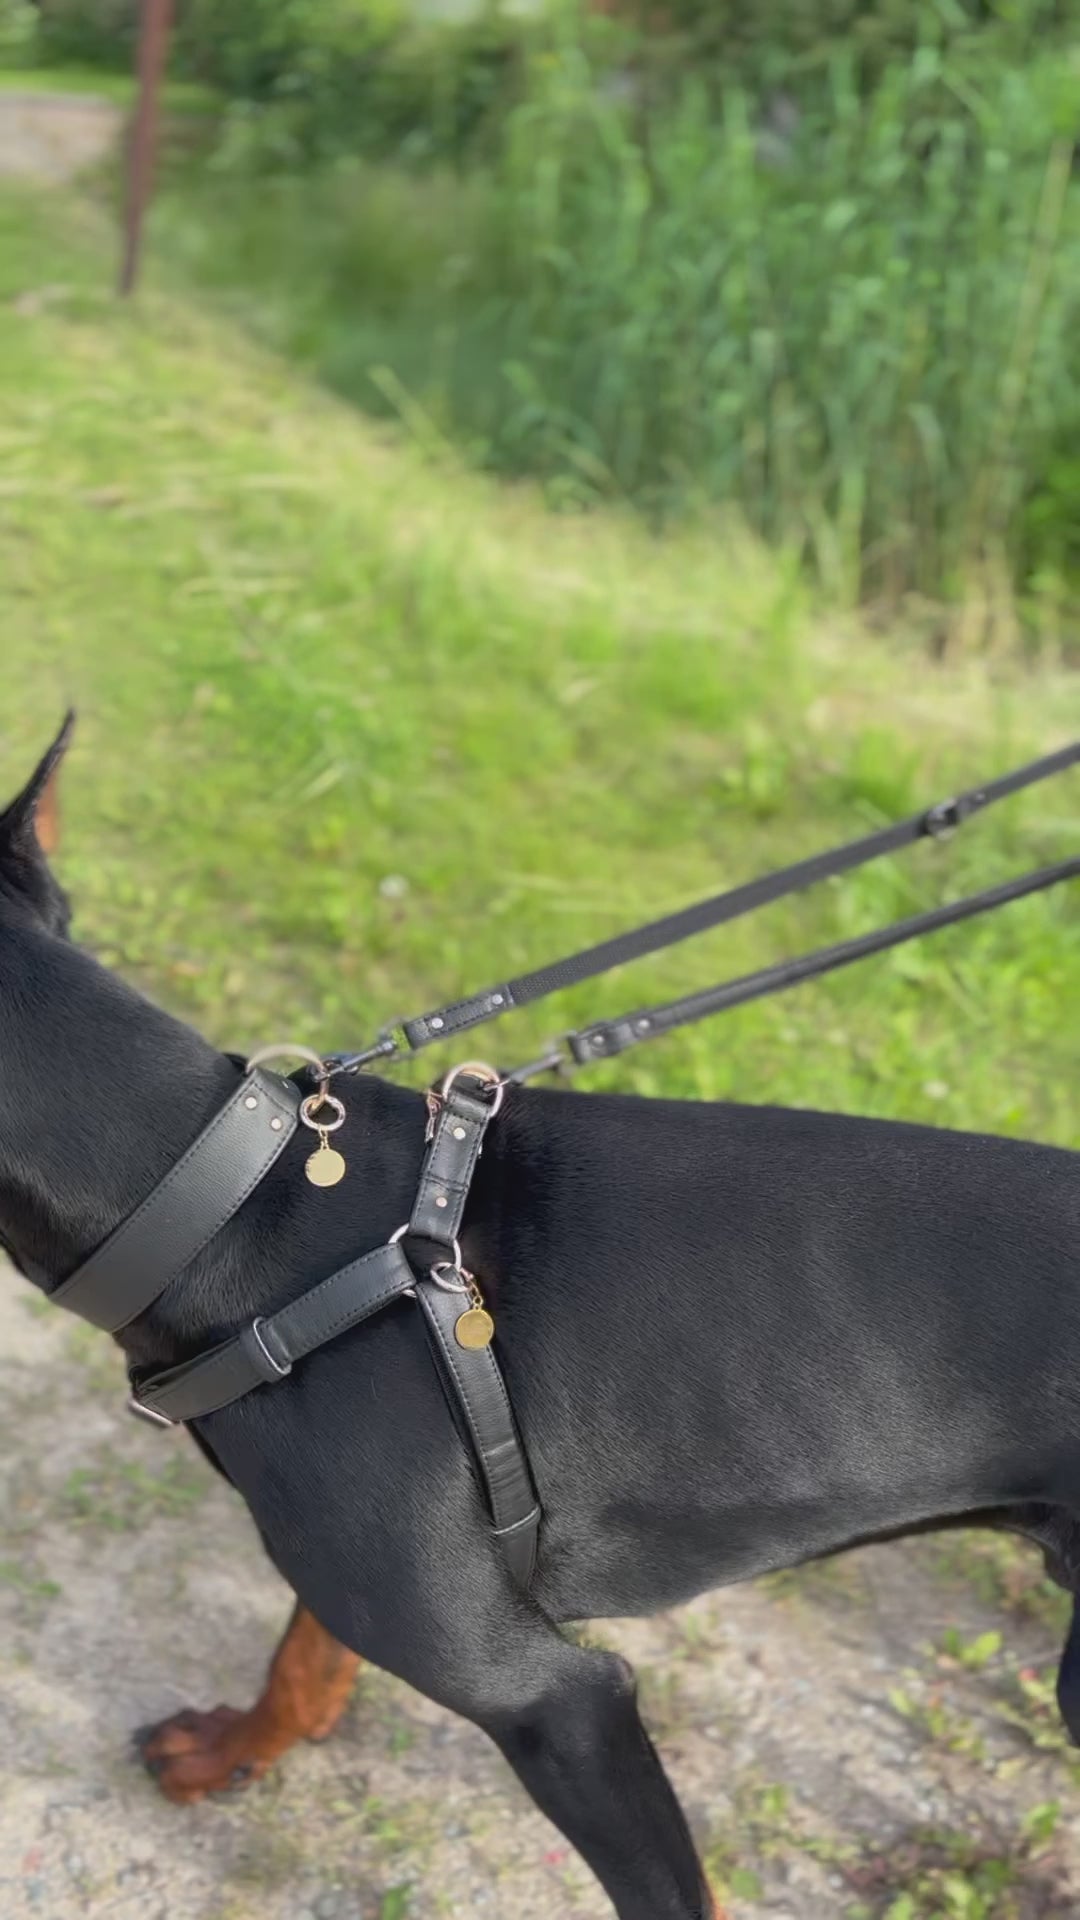 DOBERMAN VEGAN HARNESS MADE FROM PINEAPPLE LEATHER - DURABLE AND ETHICAL, SUSTAINABLE PET FASHION